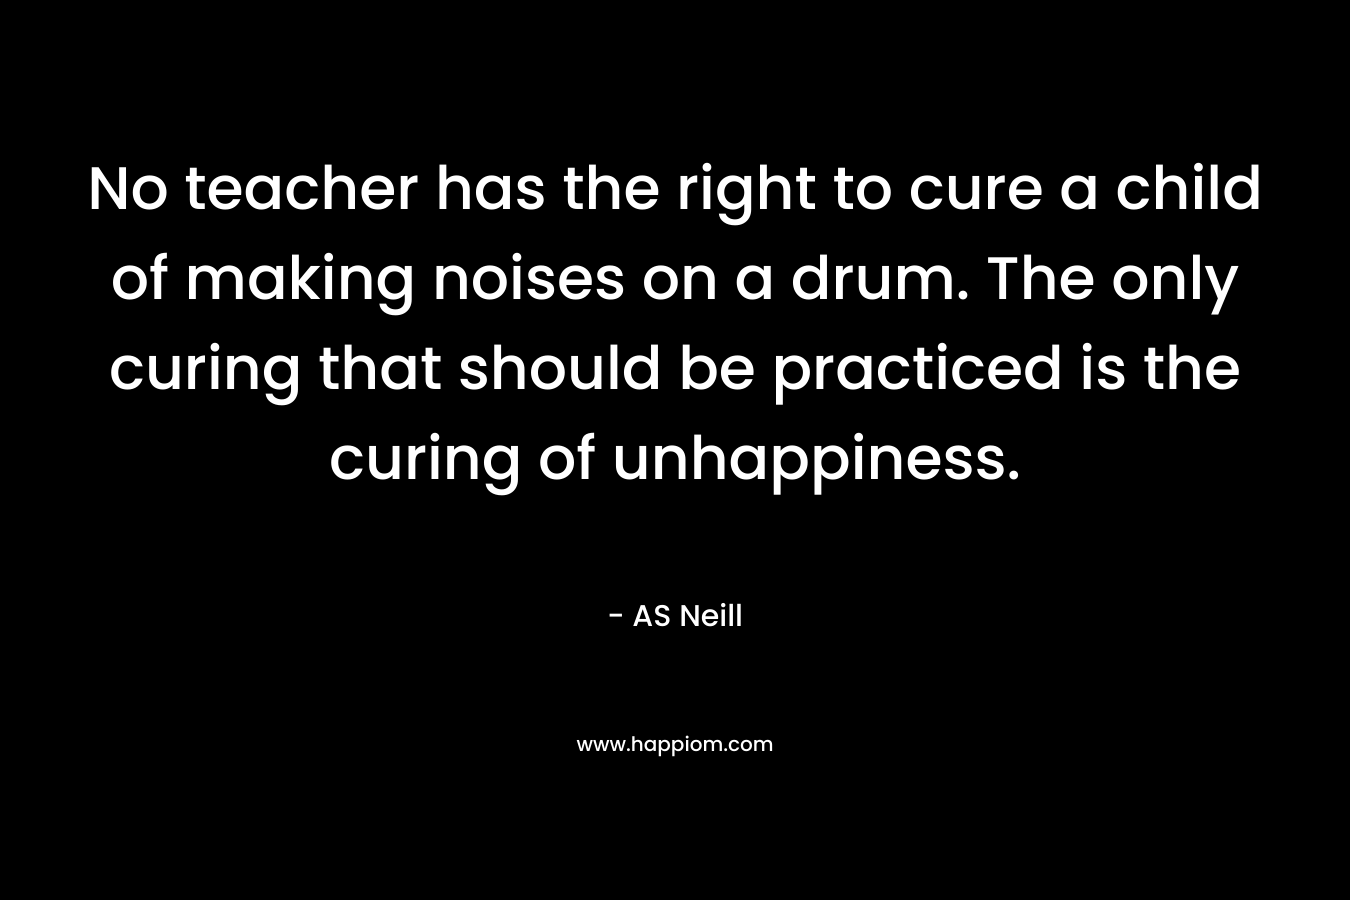 No teacher has the right to cure a child of making noises on a drum. The only curing that should be practiced is the curing of unhappiness.